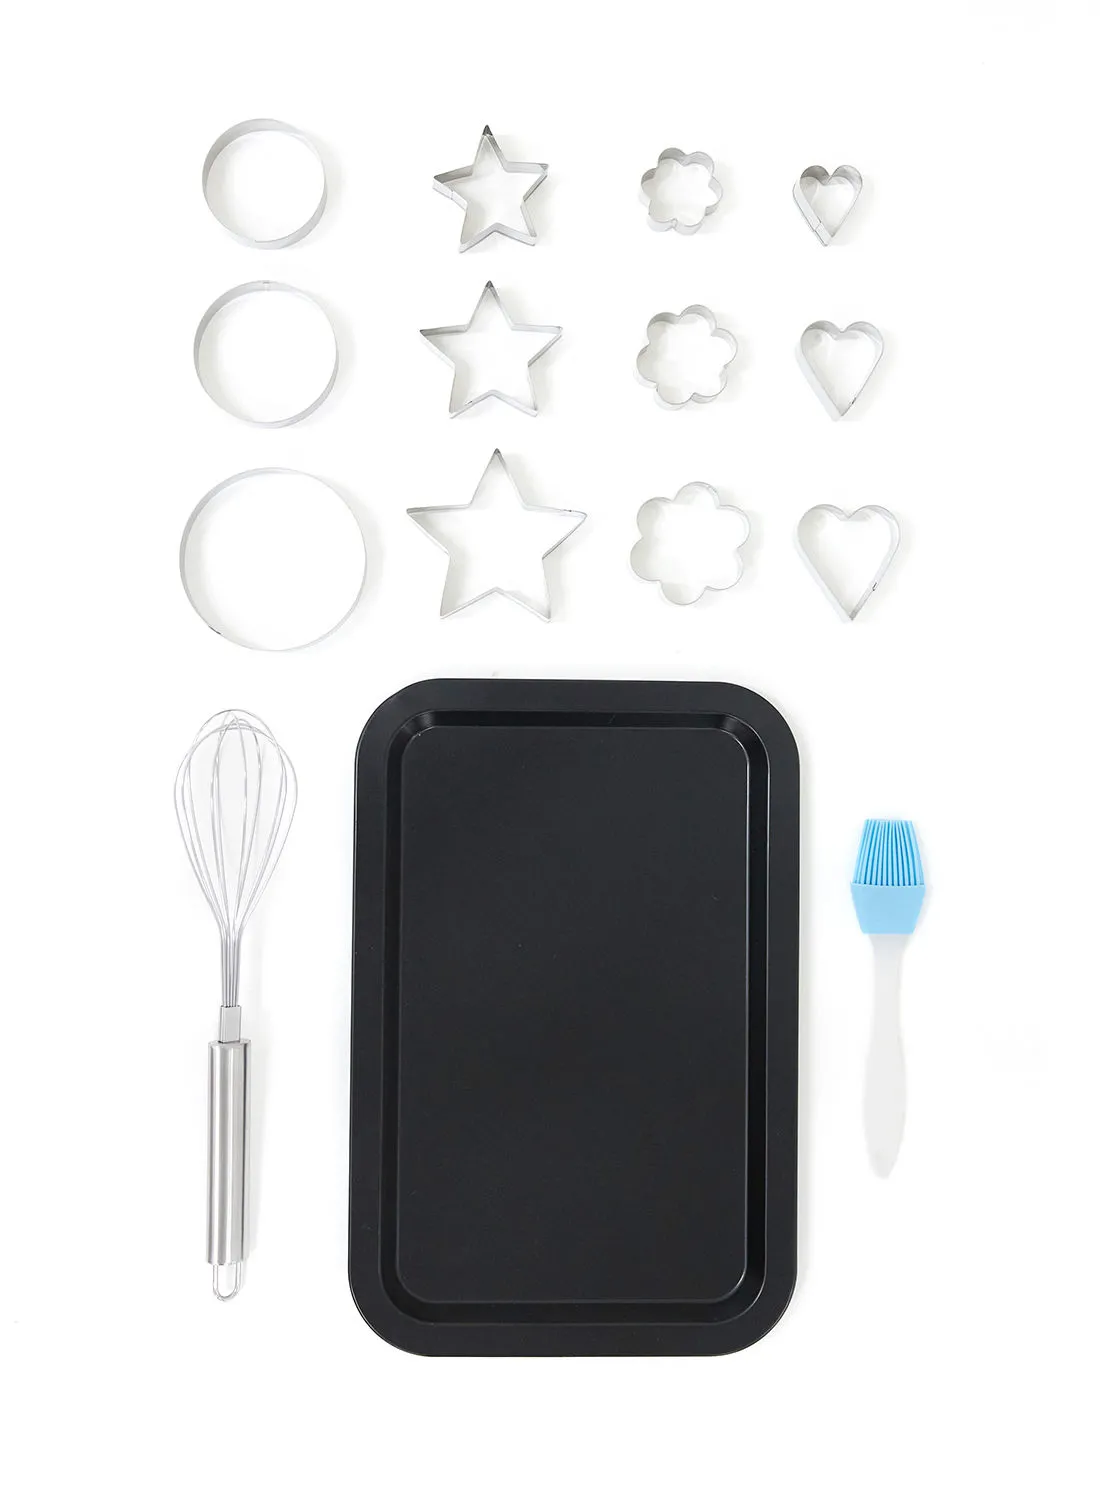 noon east 15 Piece Oven Pan Set - Made Of Carbon Steel - Geometric Shapes - Baking Pan - Oven Trays - Cake Tray - Oven Pan - Black